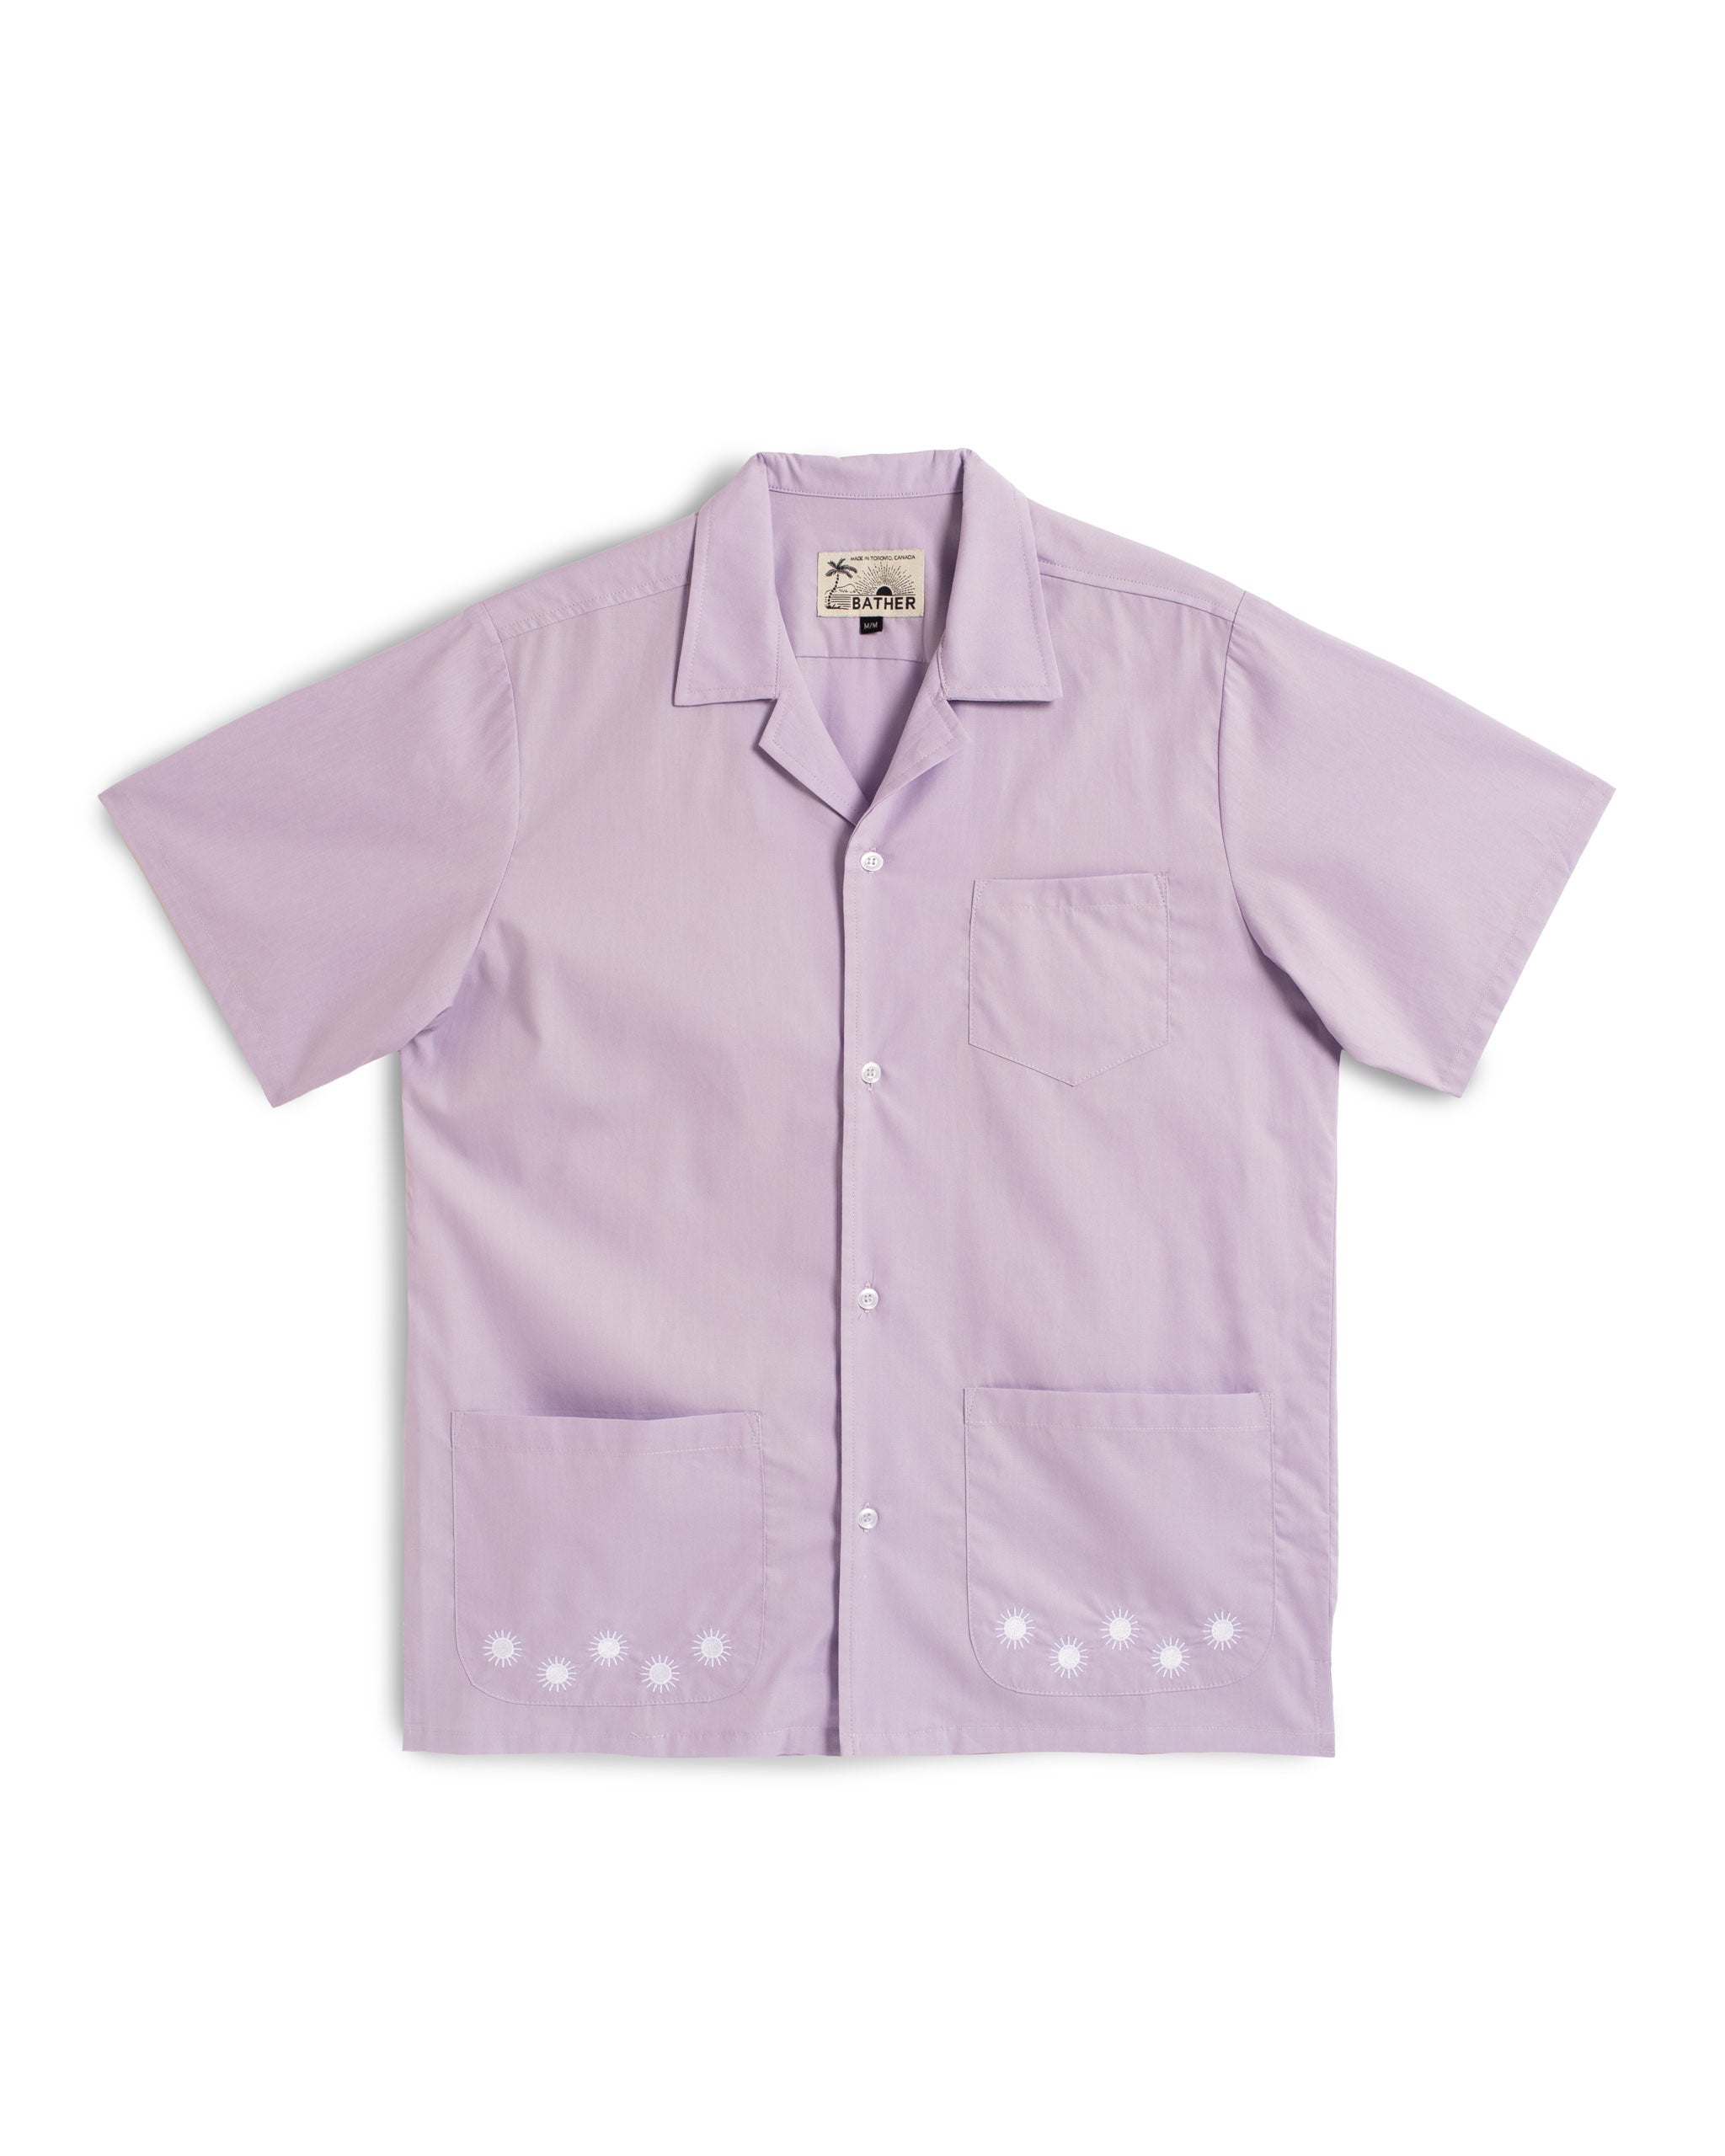 Lavender embroidered sun camp shirt